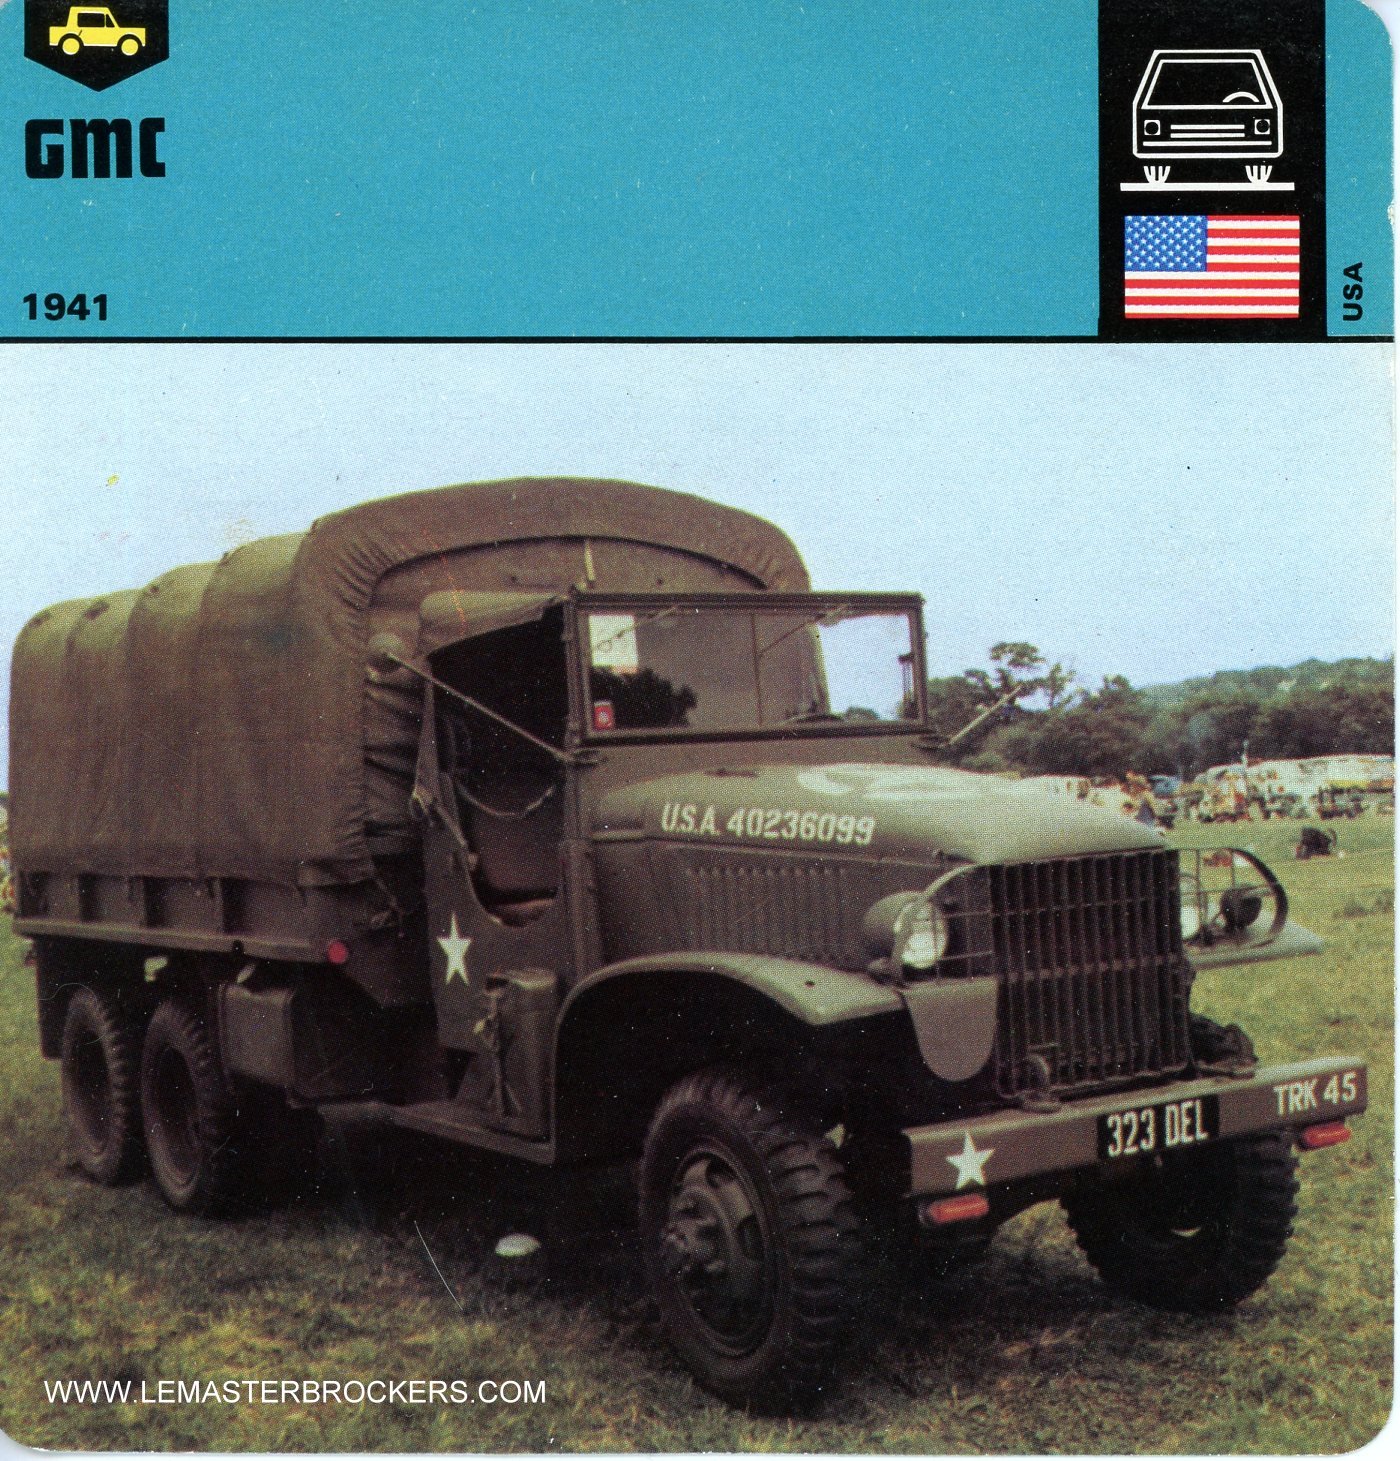 FICHE CAMION MILITAIRE GMC 1941-CARS-CARD-LEMASTERBROCKERS